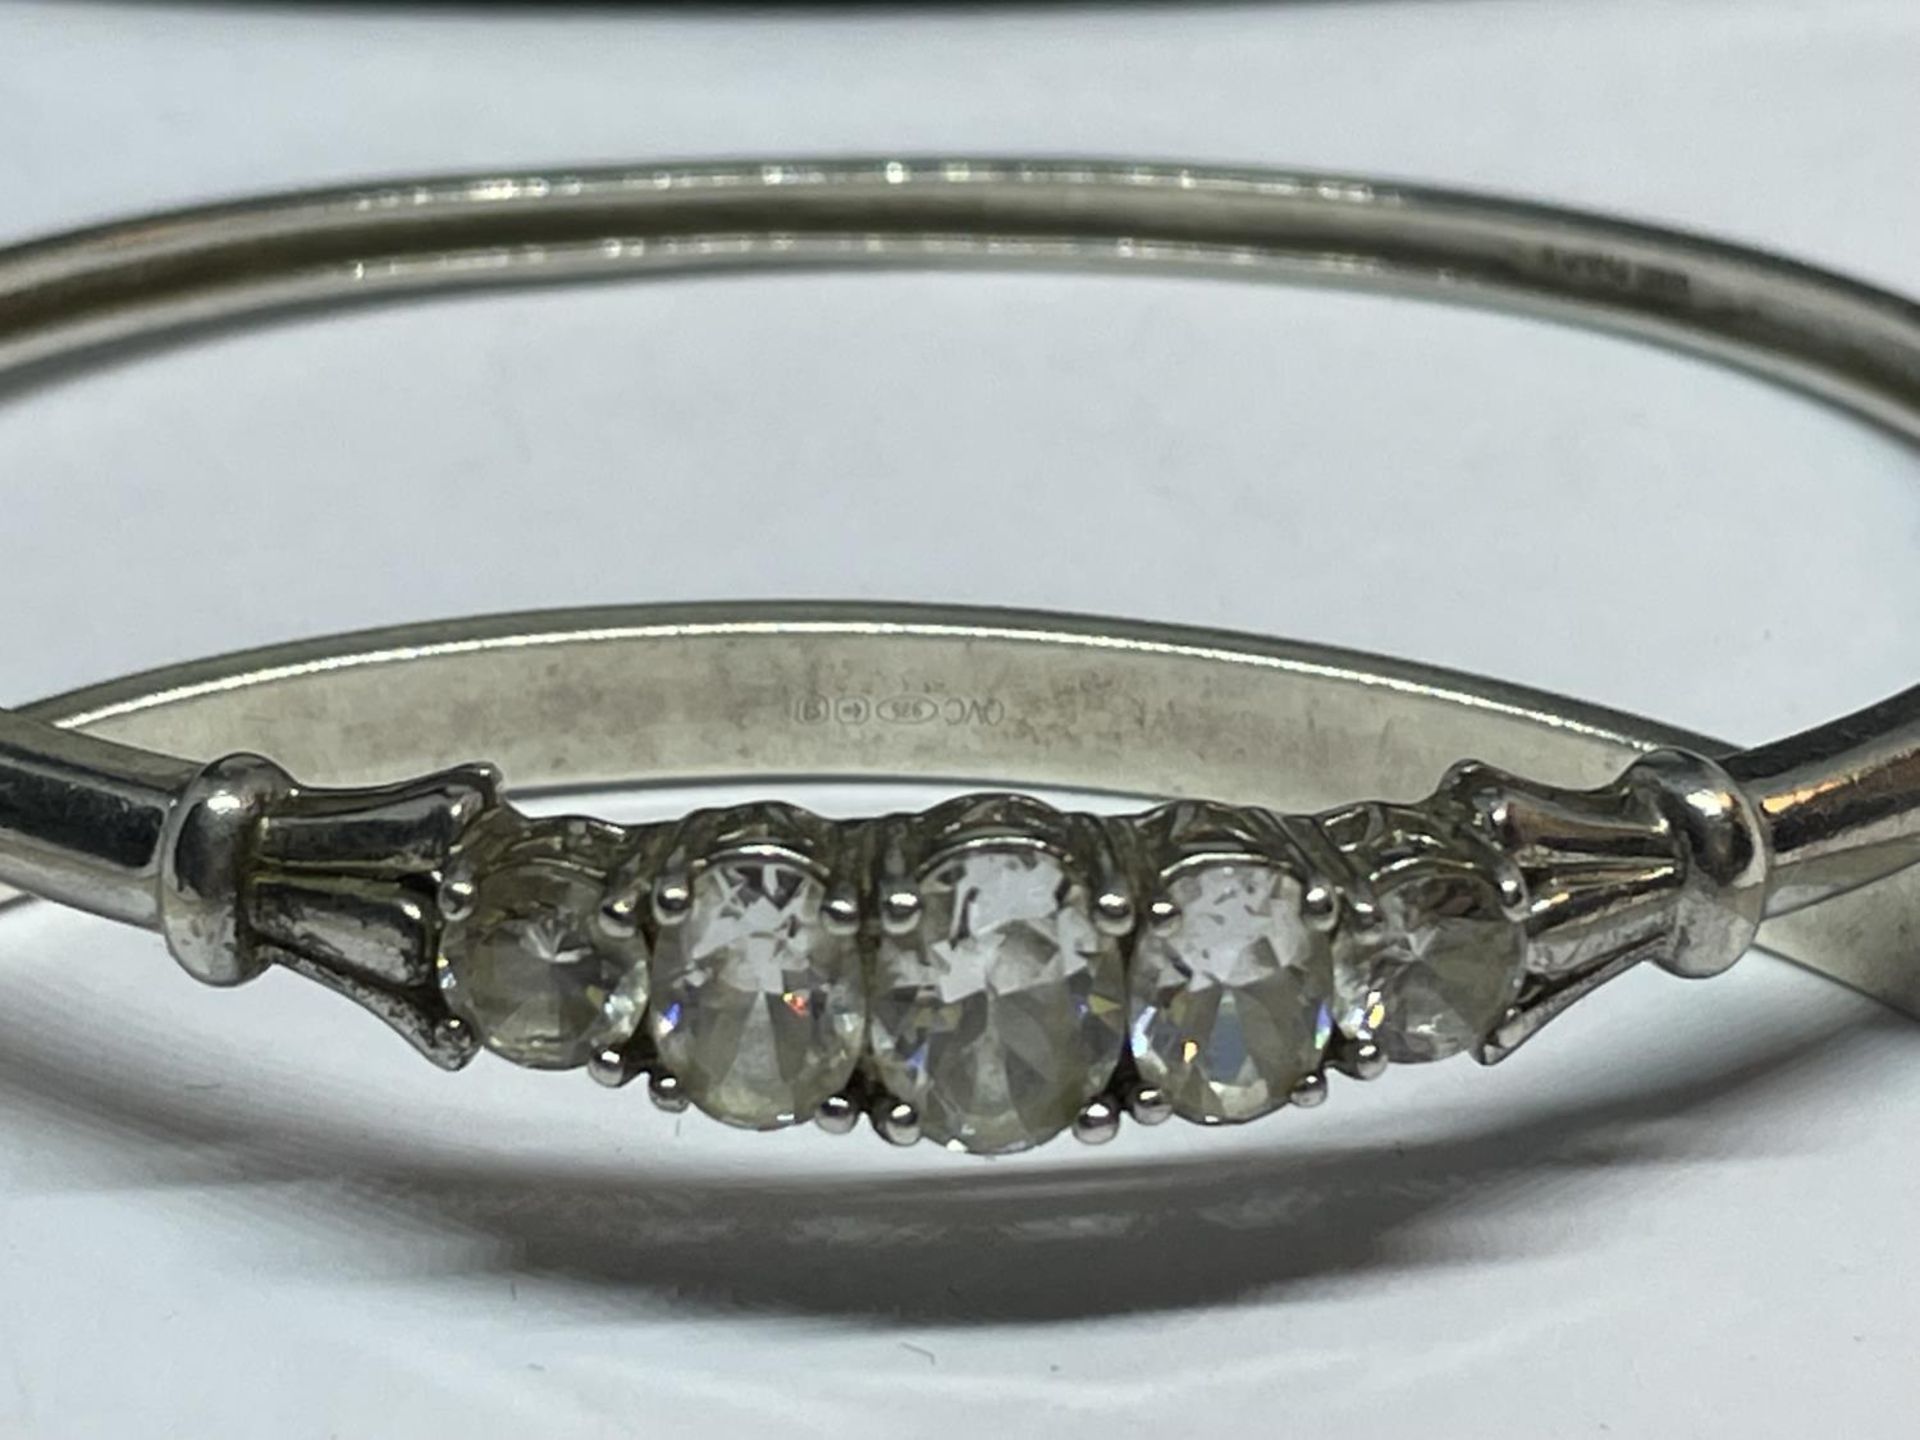 TWO SILVER BANGLES WITH CLEAR STONES IN A PRESENTATION BOX - Image 2 of 3